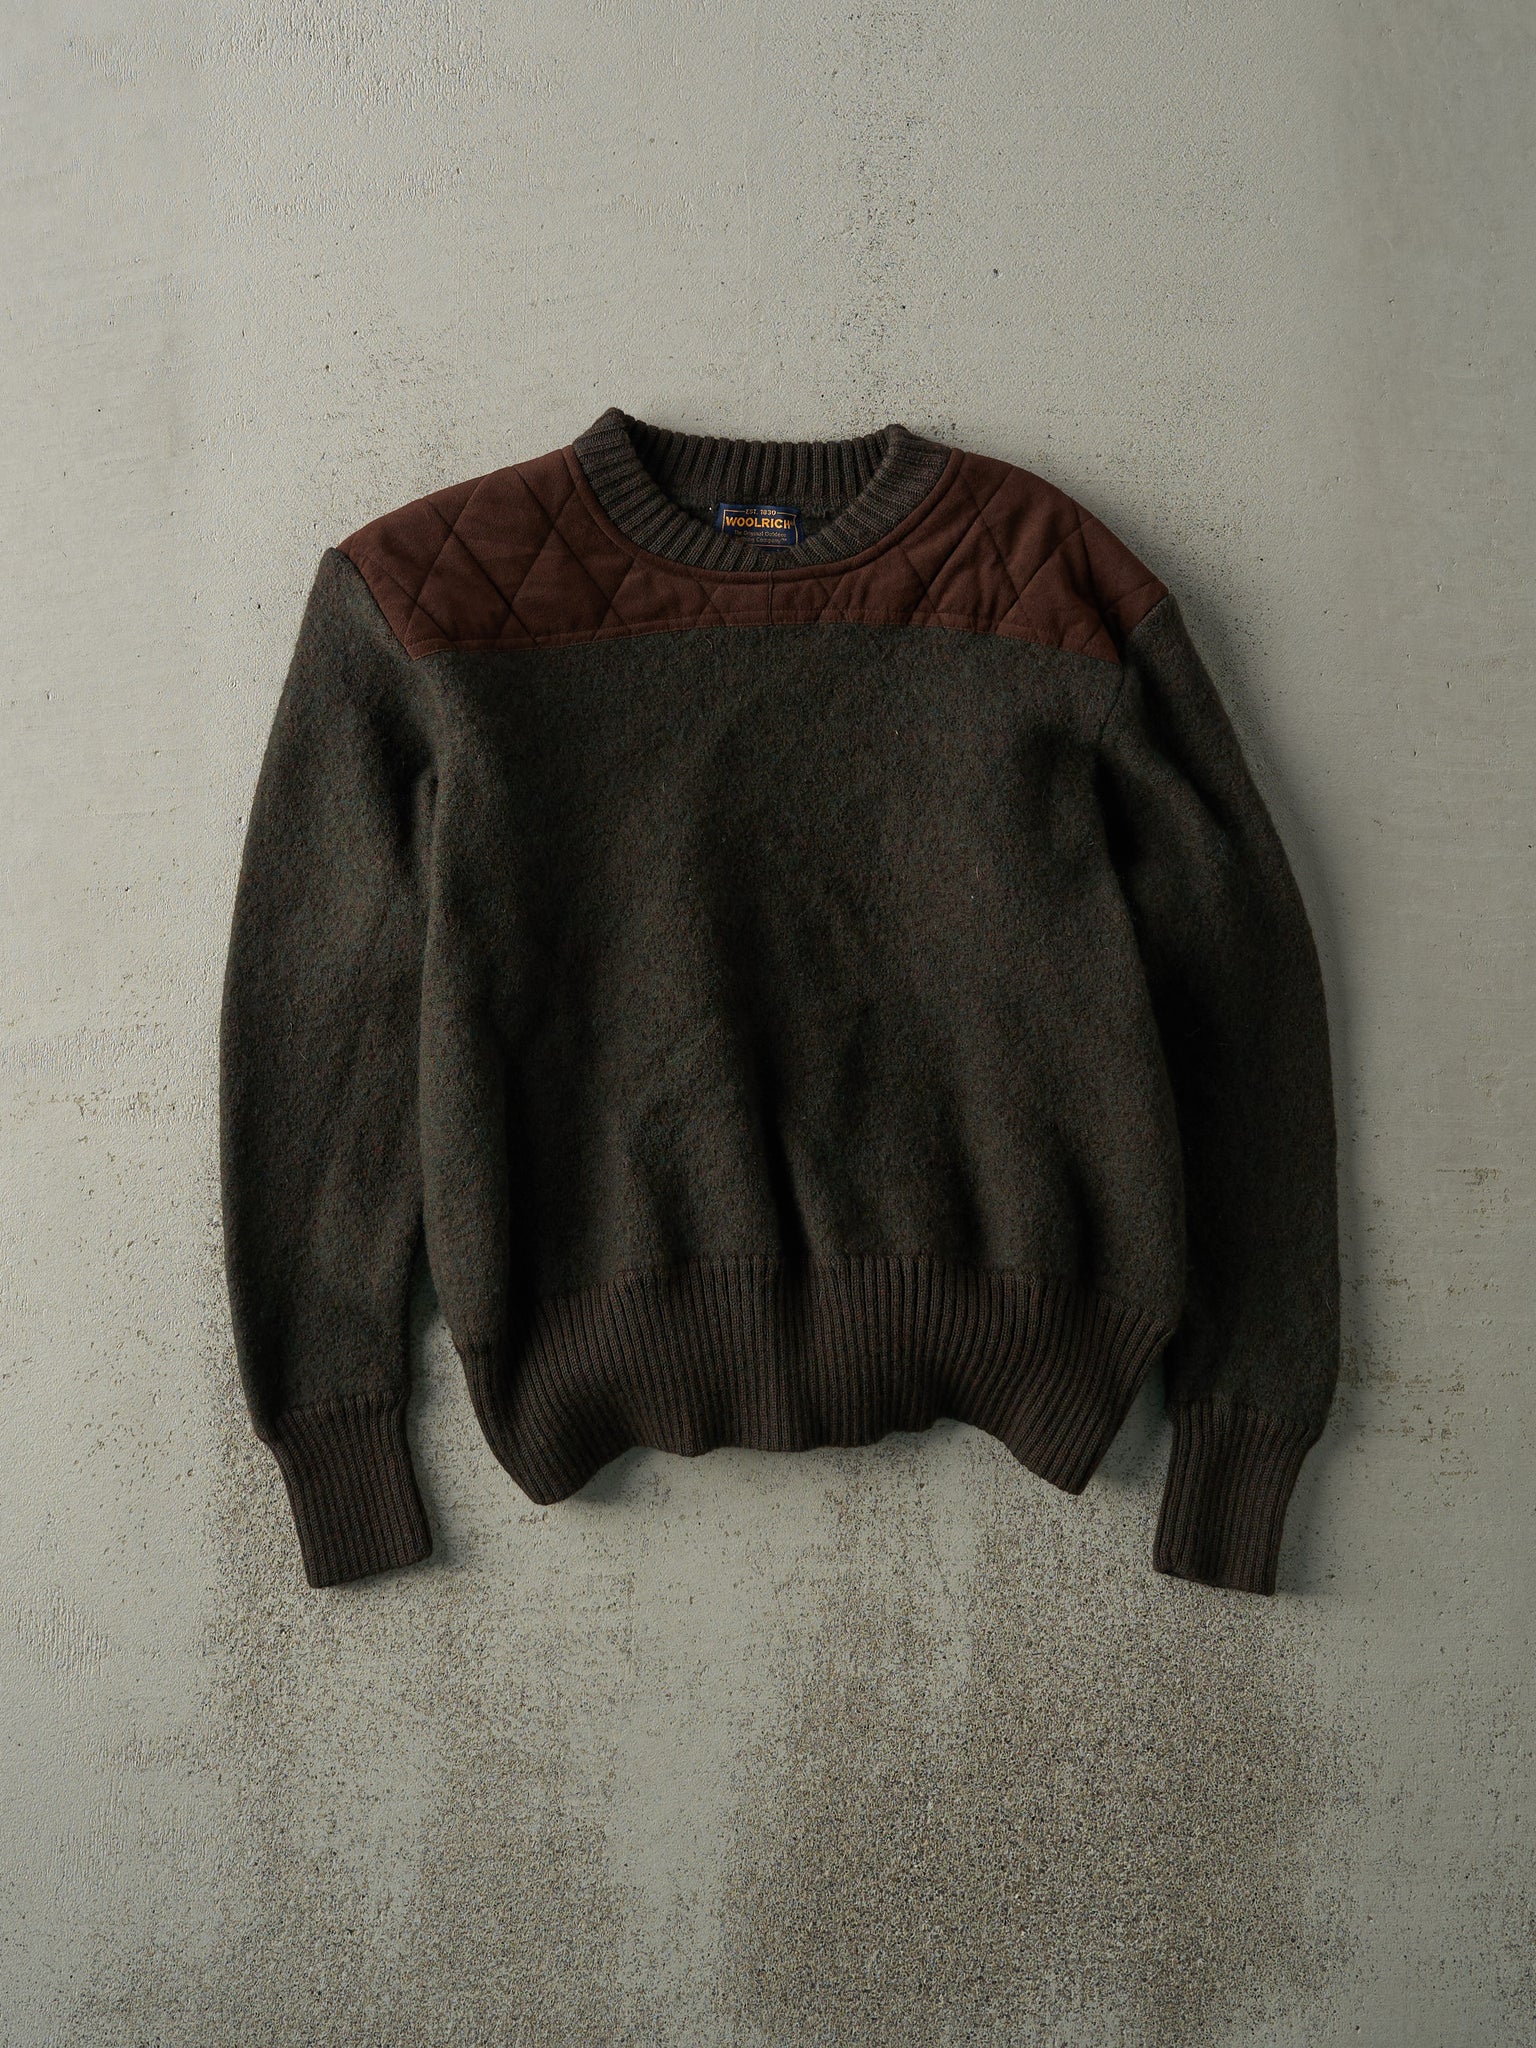 Vintage 80s Green and Brown Woolrich Knit Pullover (XS)